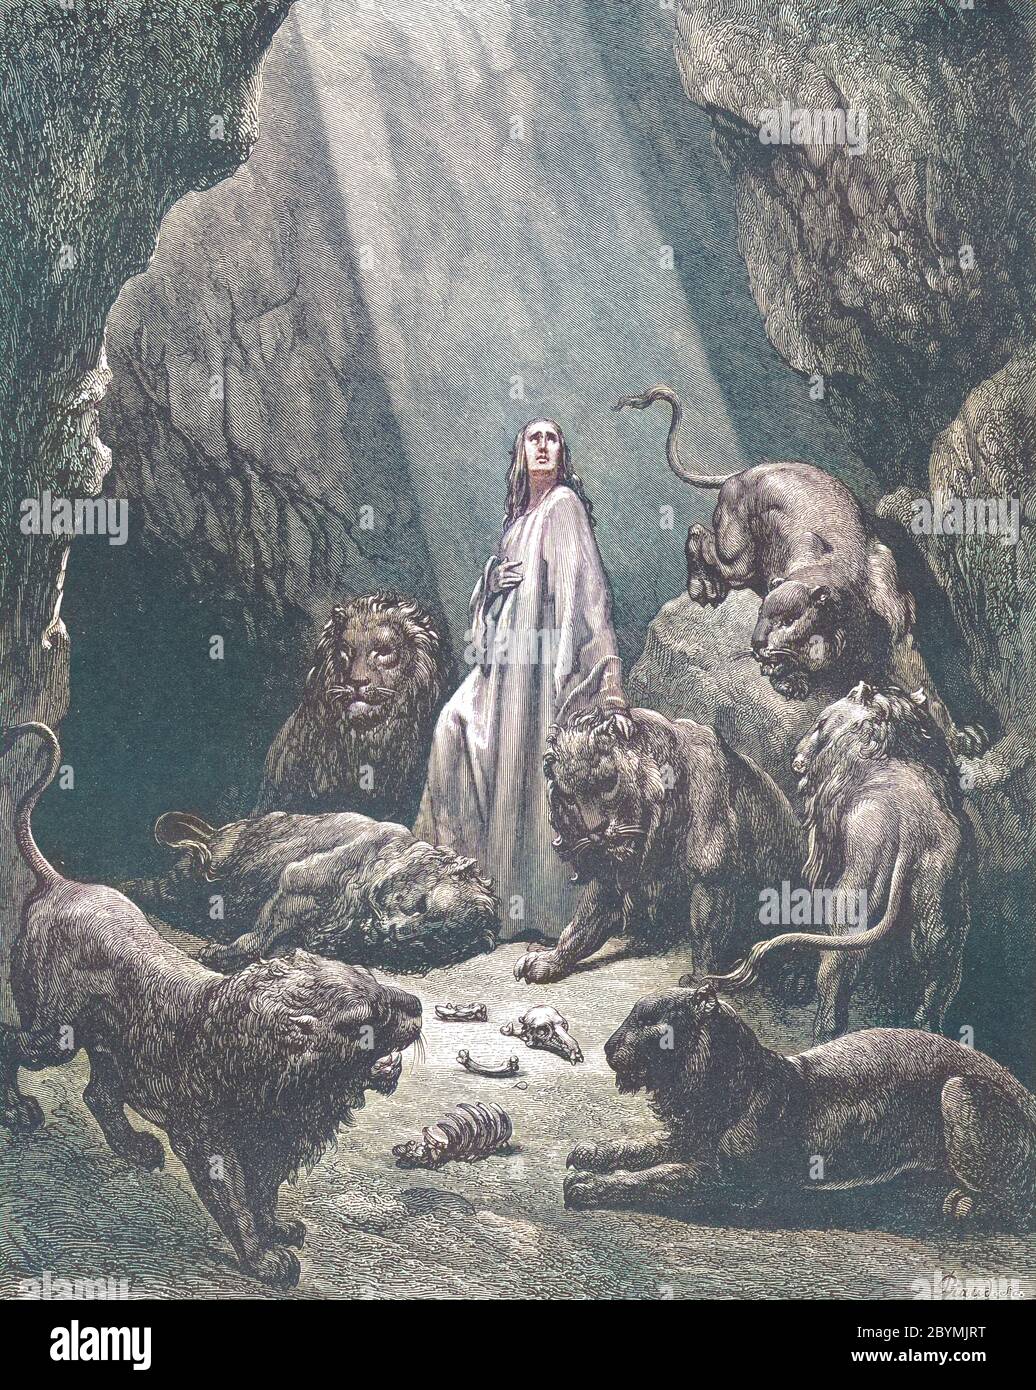 Machine Colourized (AI) Daniel in the Den of Lions Daniel 6:20-21 From the book 'Bible Gallery' Illustrated by Gustave Dore with Memoir of Dore and Descriptive Letter-press by Talbot W. Chambers D.D. Published by Cassell & Company Limited in London and simultaneously by Mame in Tours, France in 1866 Stock Photo